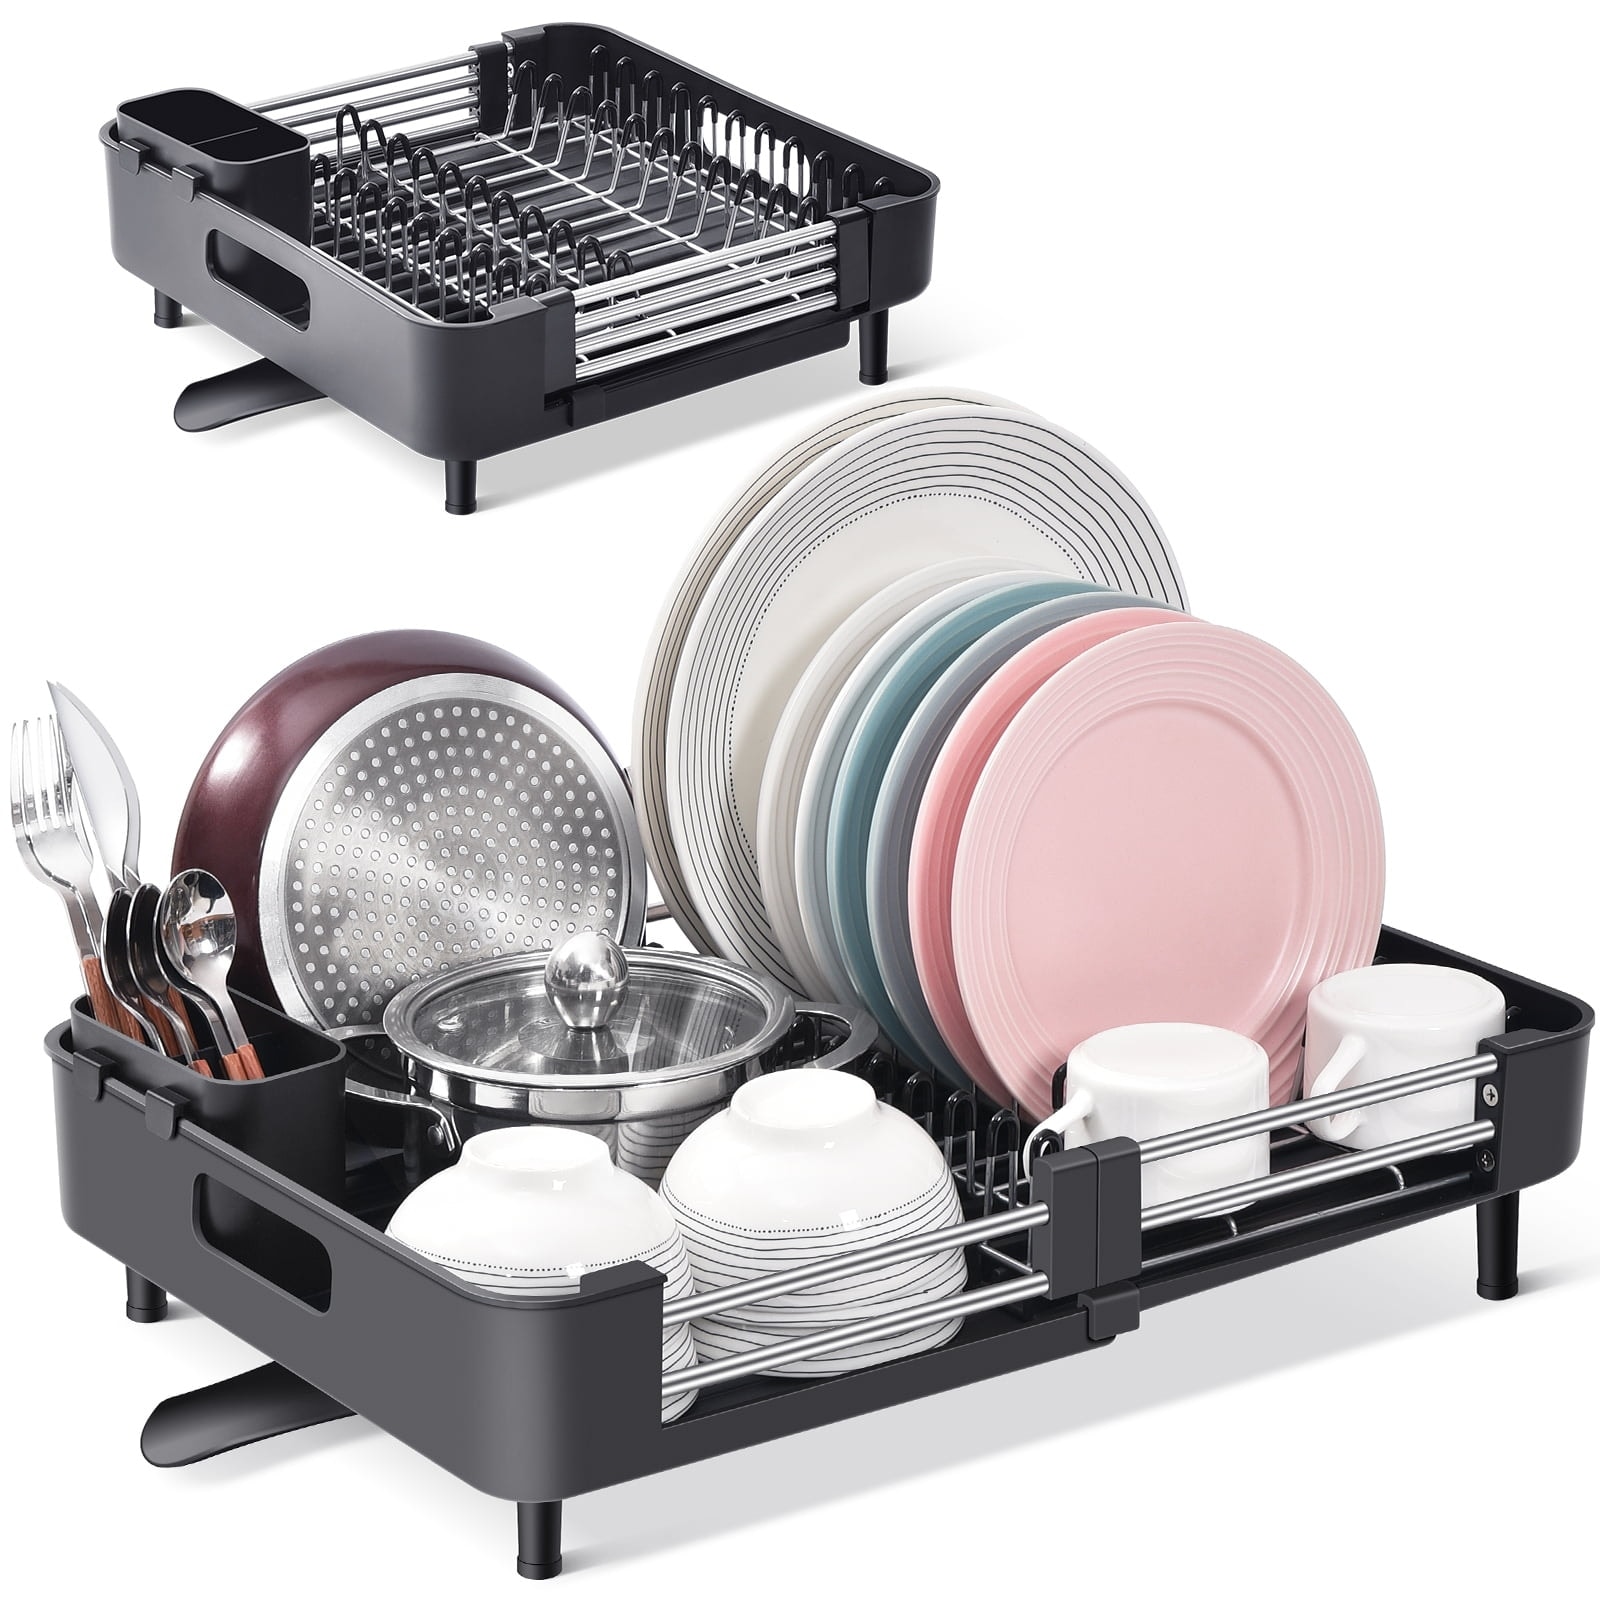 https://ak1.ostkcdn.com/images/products/is/images/direct/9ebe4abae70ffd940d7ecde28fe7d1854b50532b/Adjustable-Dish-Drying-Rack-for-Kitchen%2C-Foldable-Dish-Drainer-with-Black.jpg